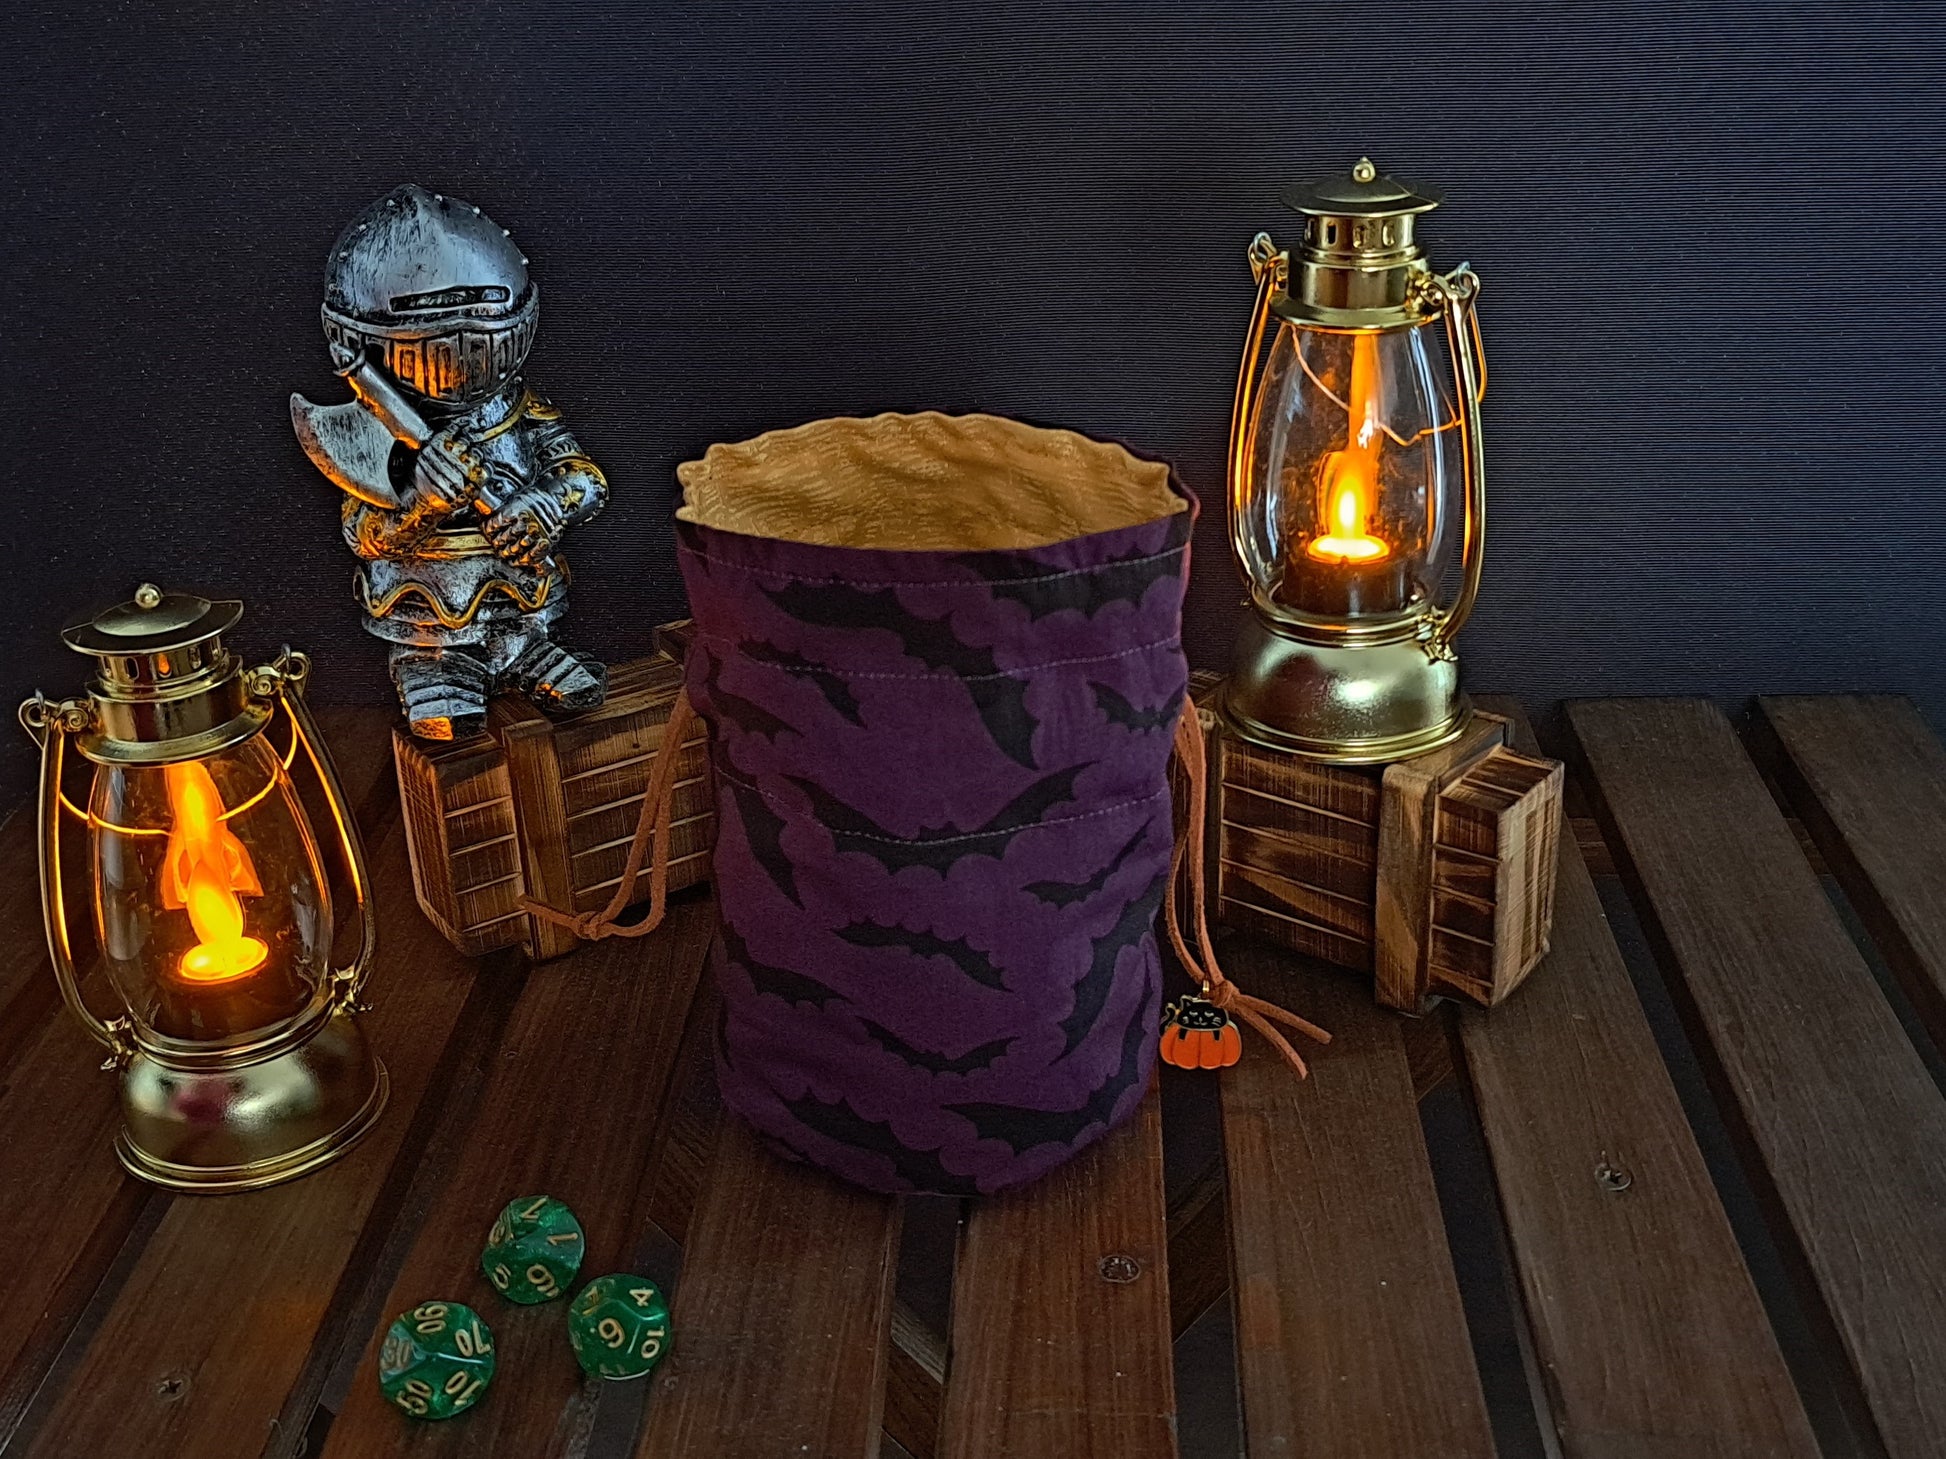 Handmade Dice bag made of purple fabric with black bats on it with a pumpkin charm